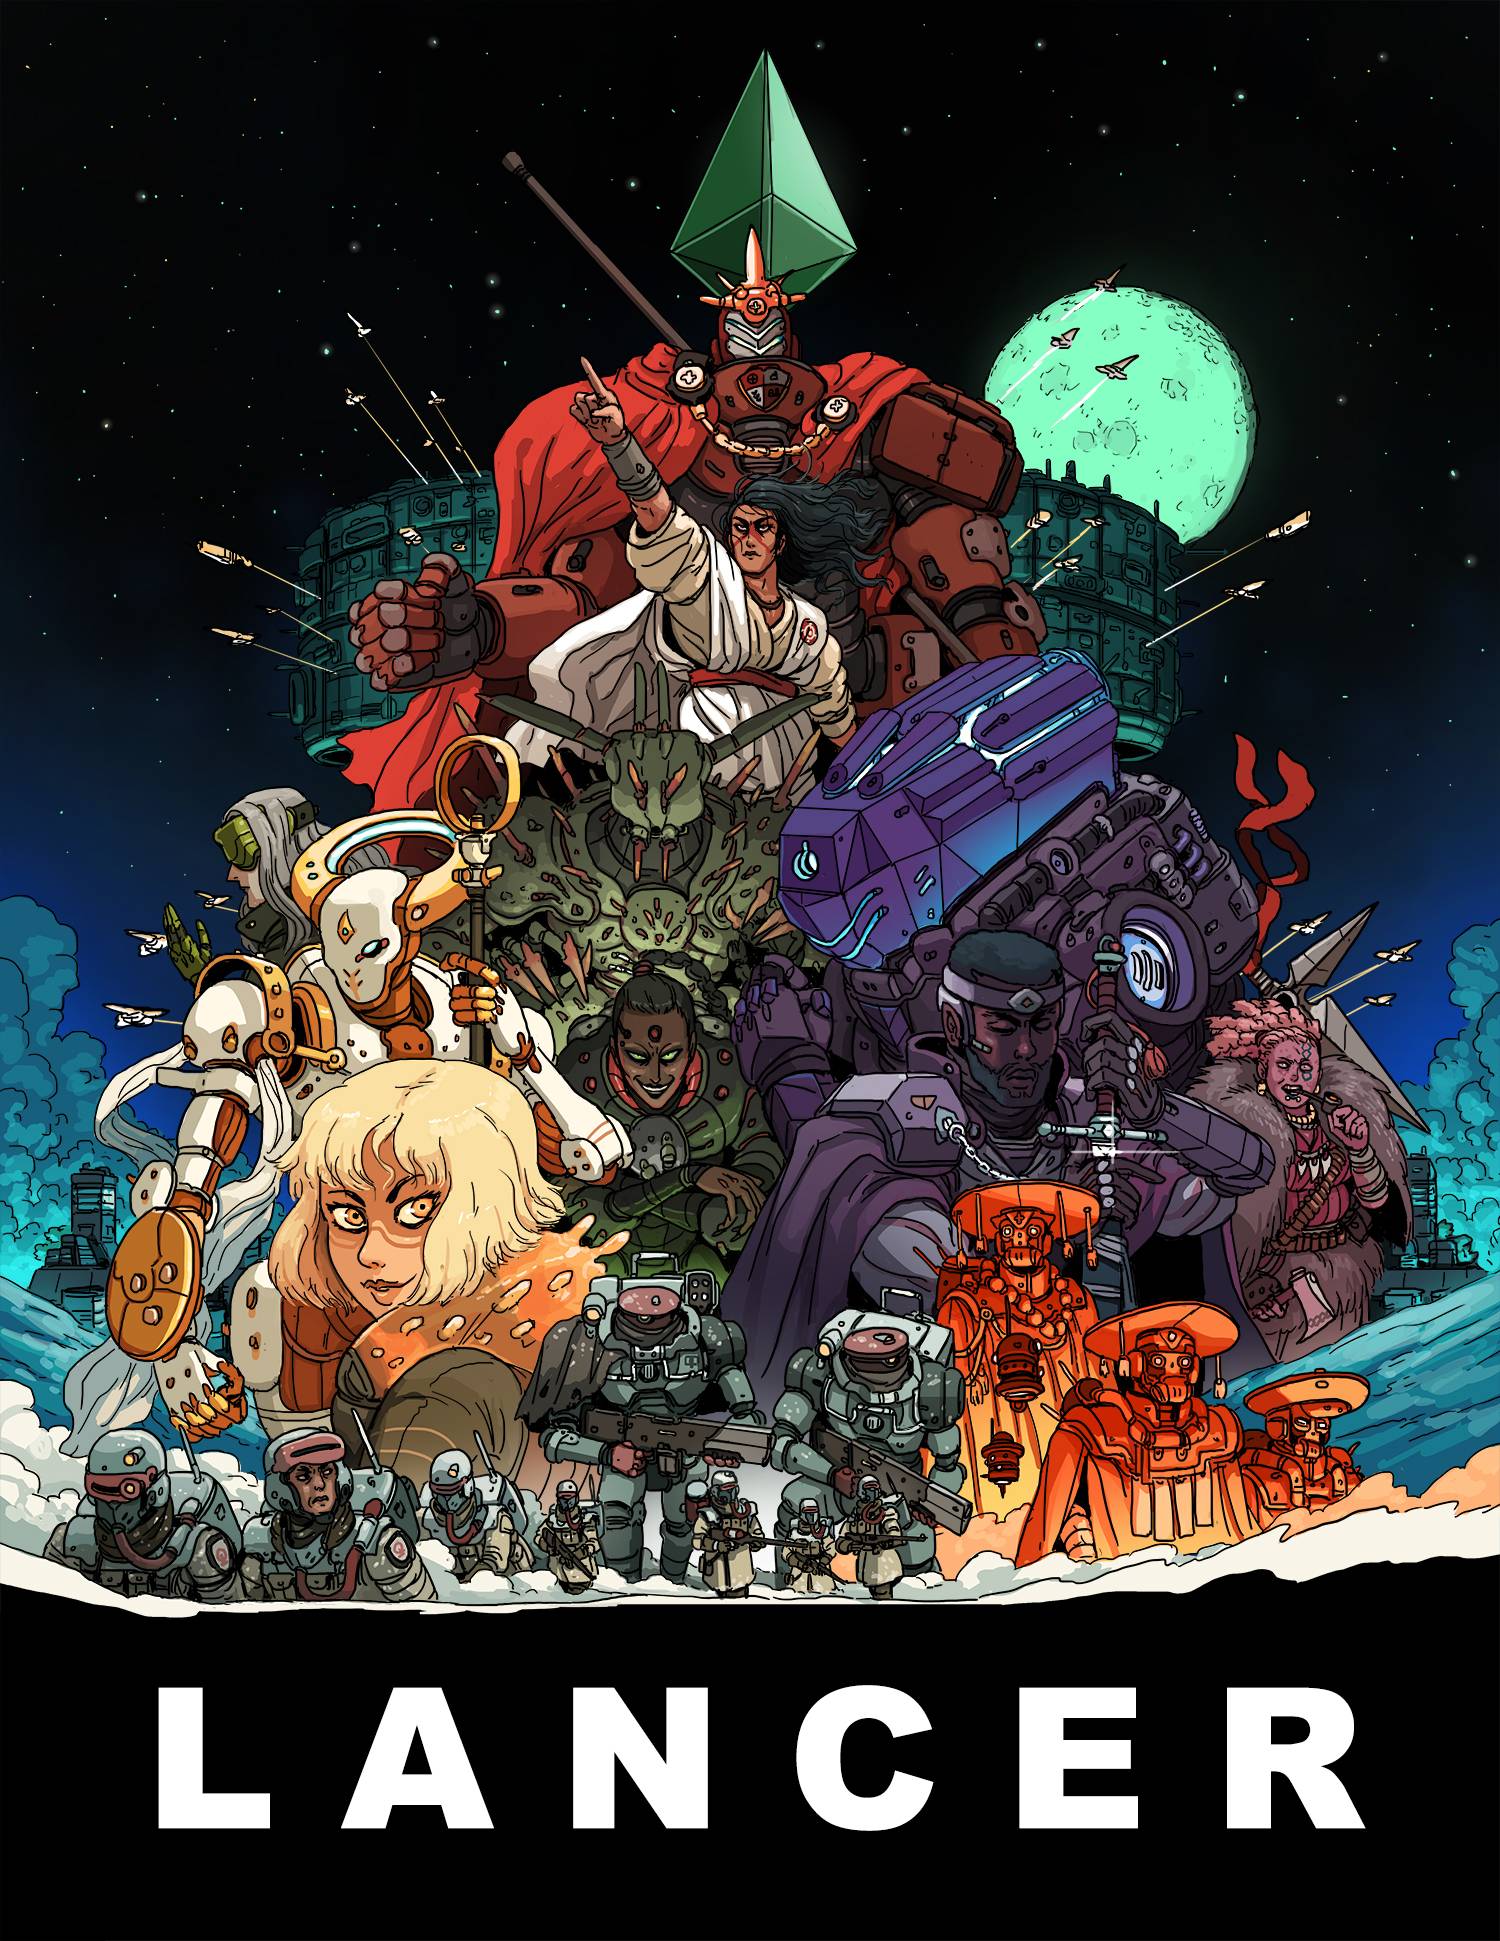 Lancer Core rulebook cover